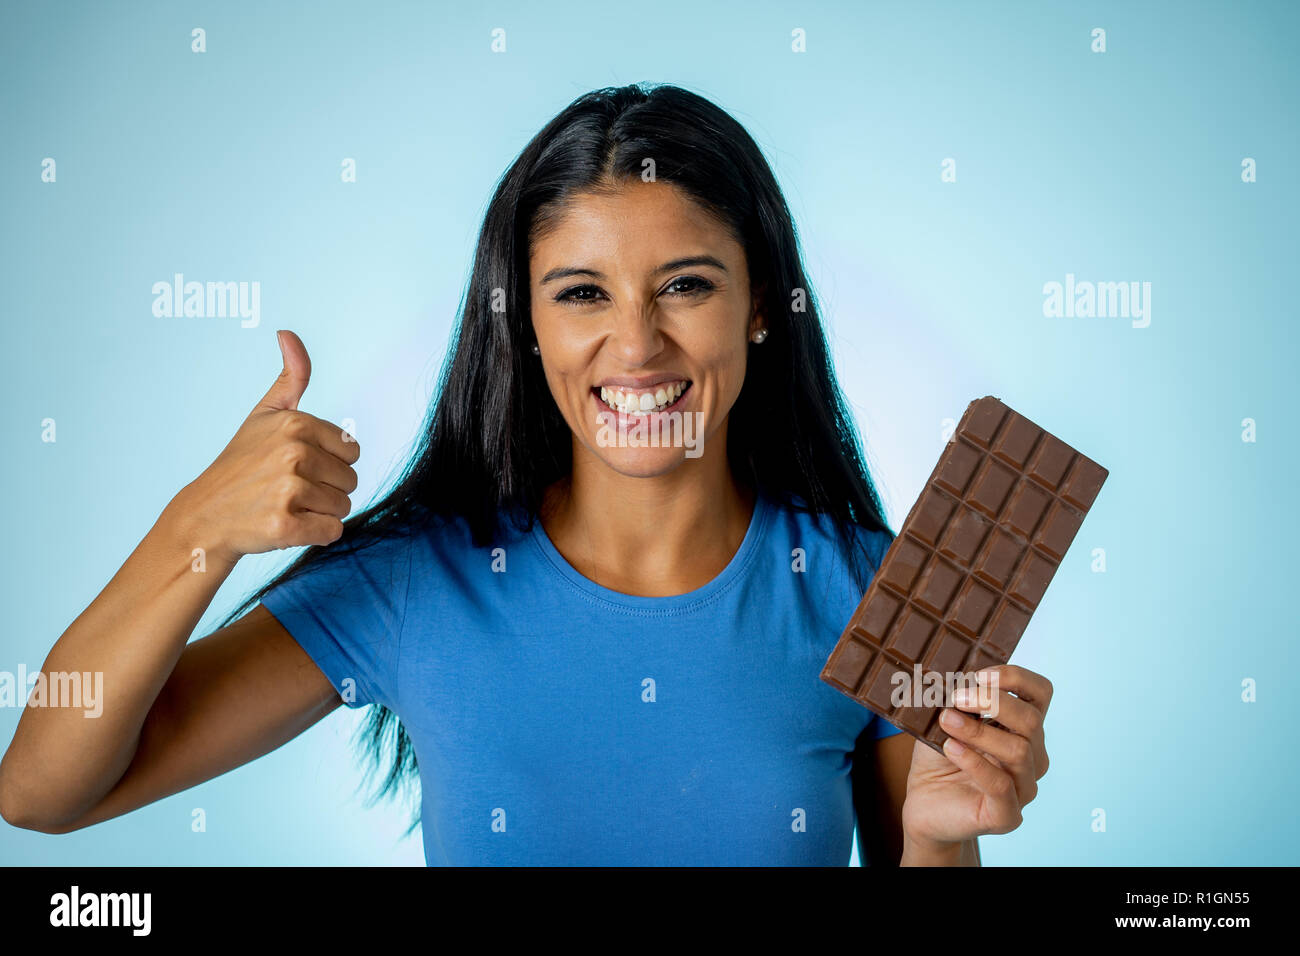 close up shot of voluptuous woman with large breast holding a bar of  chocolate in a bra Stock Photo - Alamy